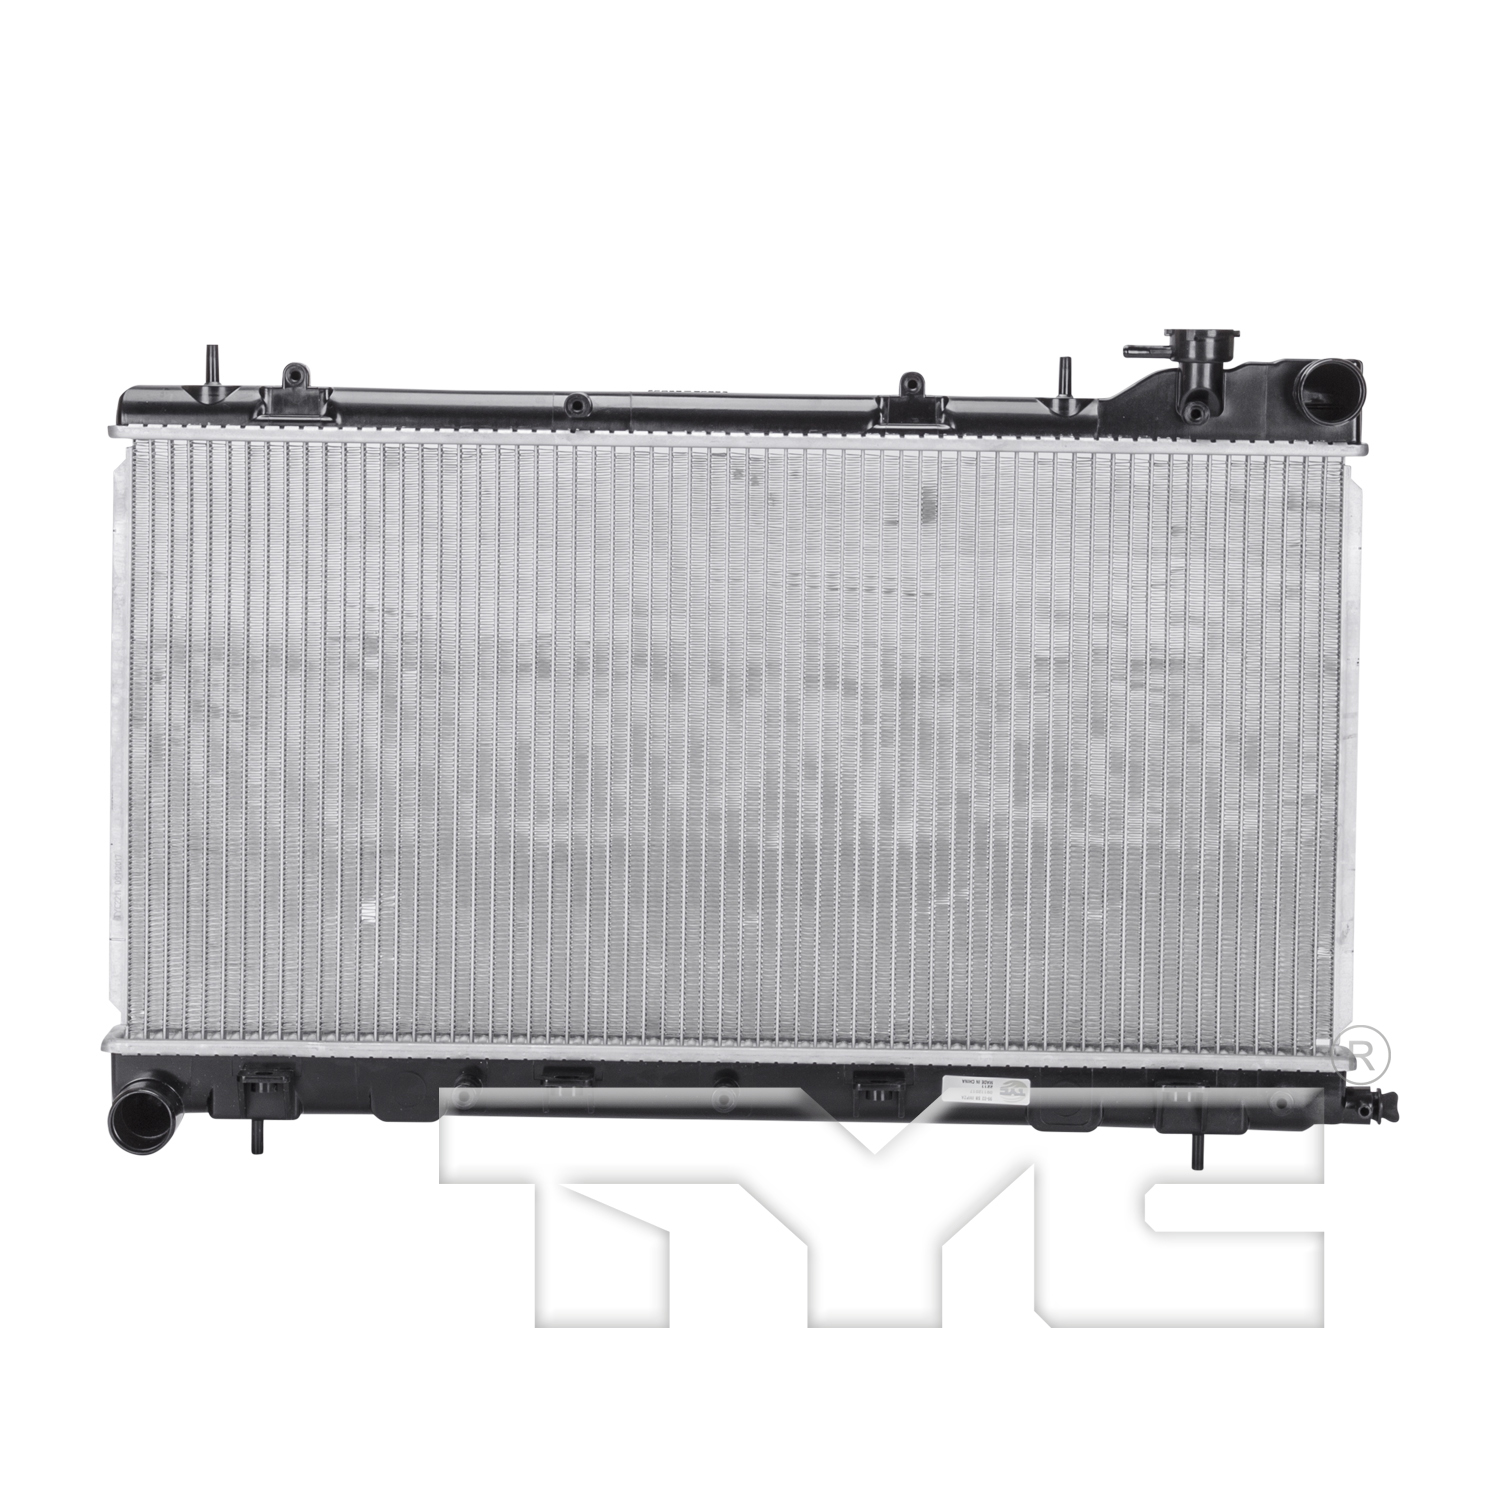 Aftermarket RADIATORS for SUBARU - FORESTER, FORESTER,99-02,Radiator assembly